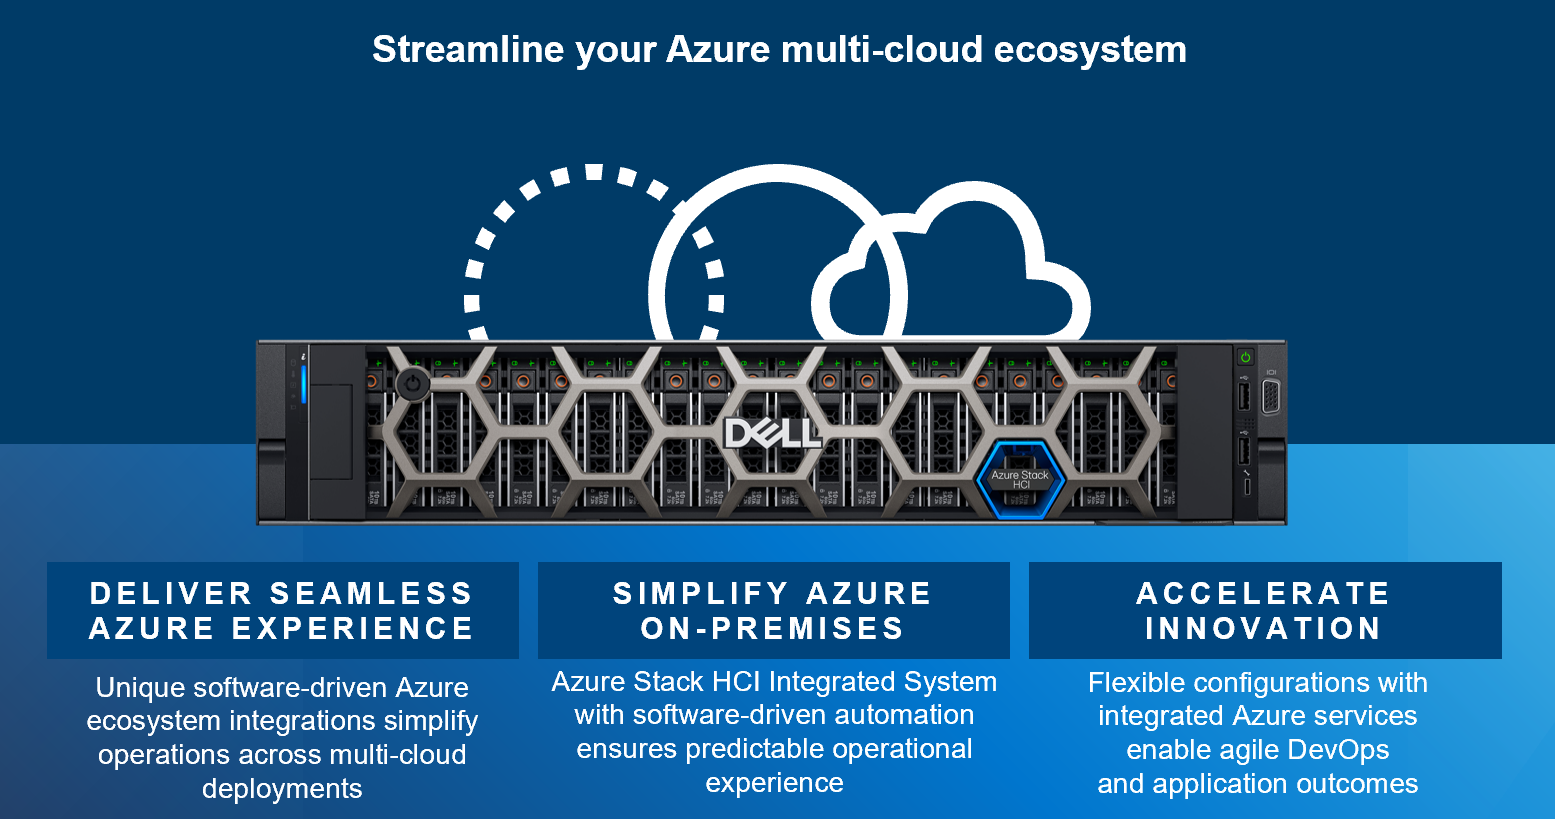 Dell Technologies vision of Microsoft Azure Stack HCI